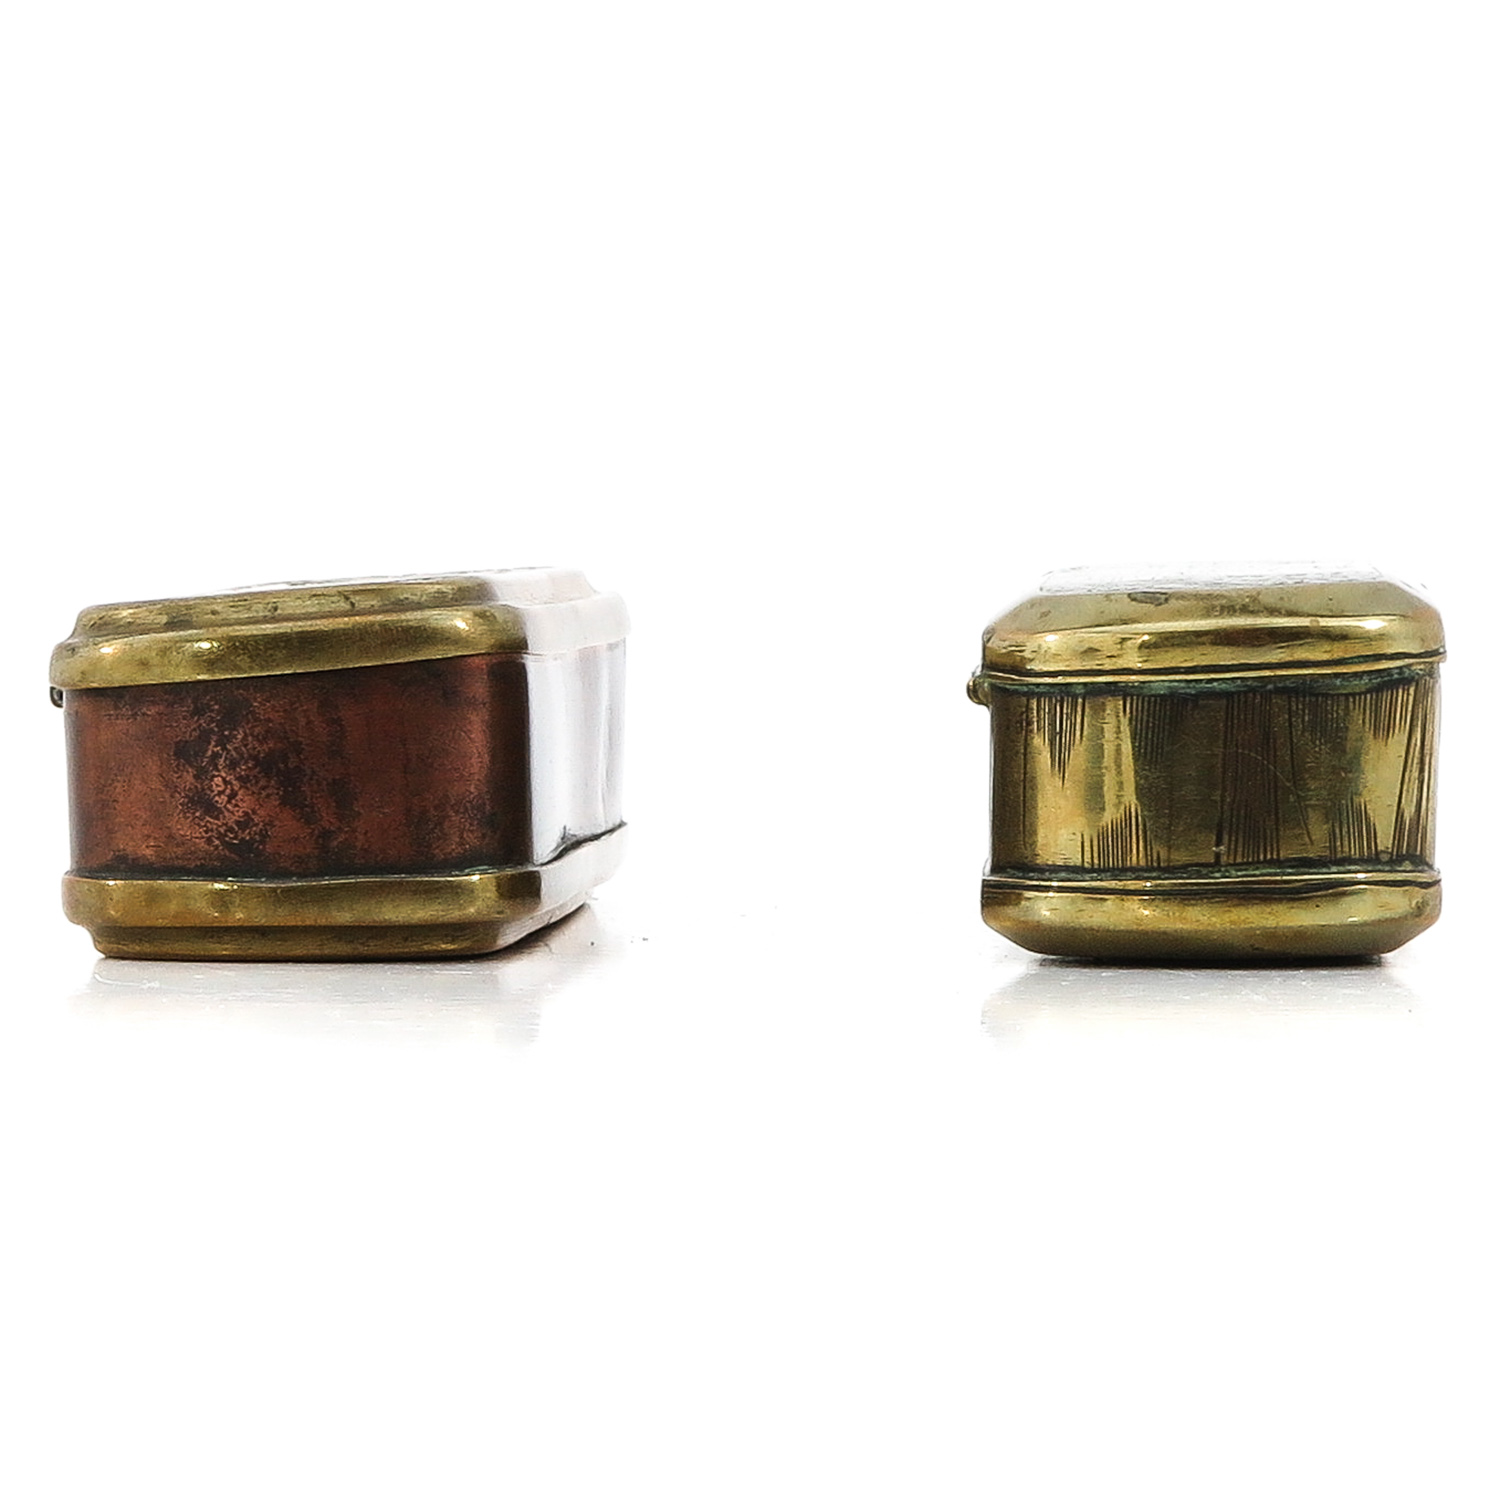 A Lot of 2 18th Century Copper Tobacco Boxes - Image 4 of 10